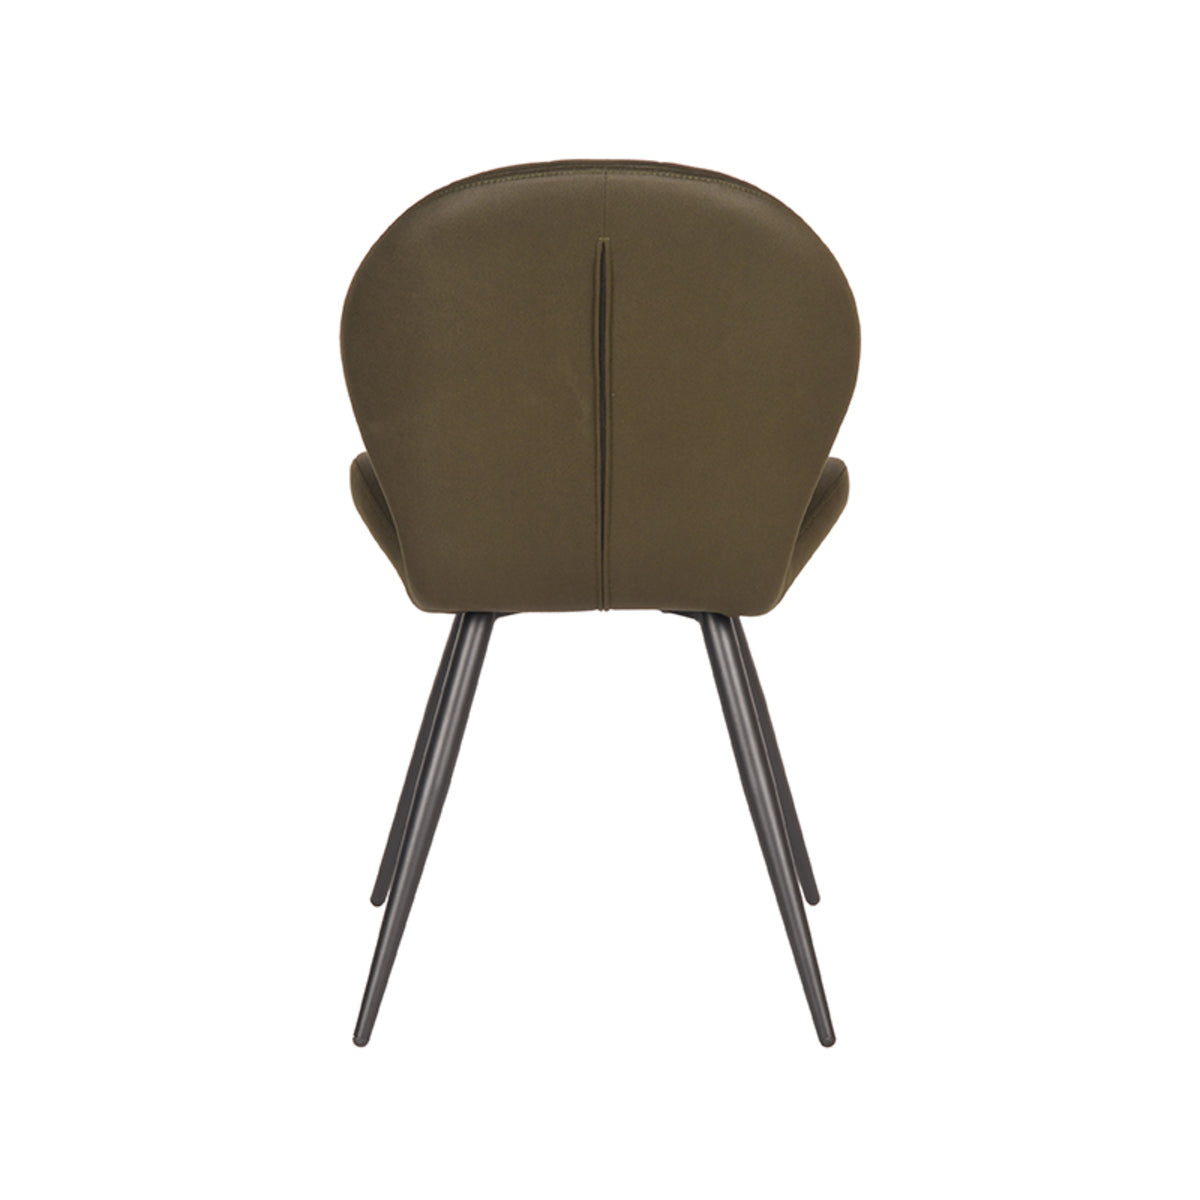 LABEL51 Dining room chair Sil - Army green - Microfiber | 2 pieces